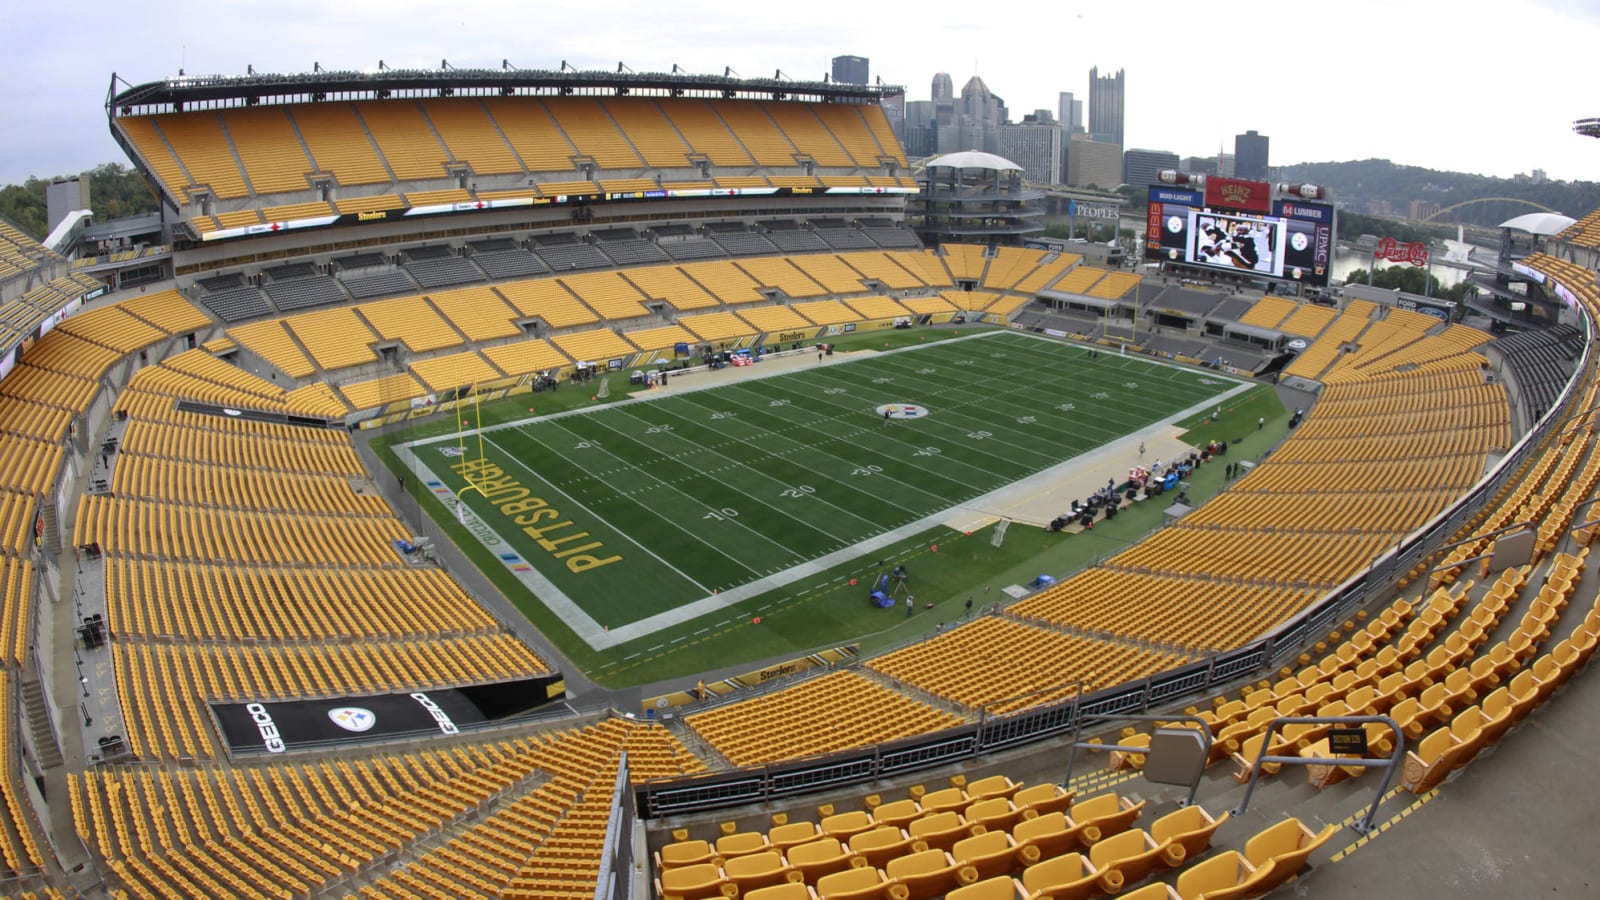 Browns-Steelers playoff crowd limited to family, friends